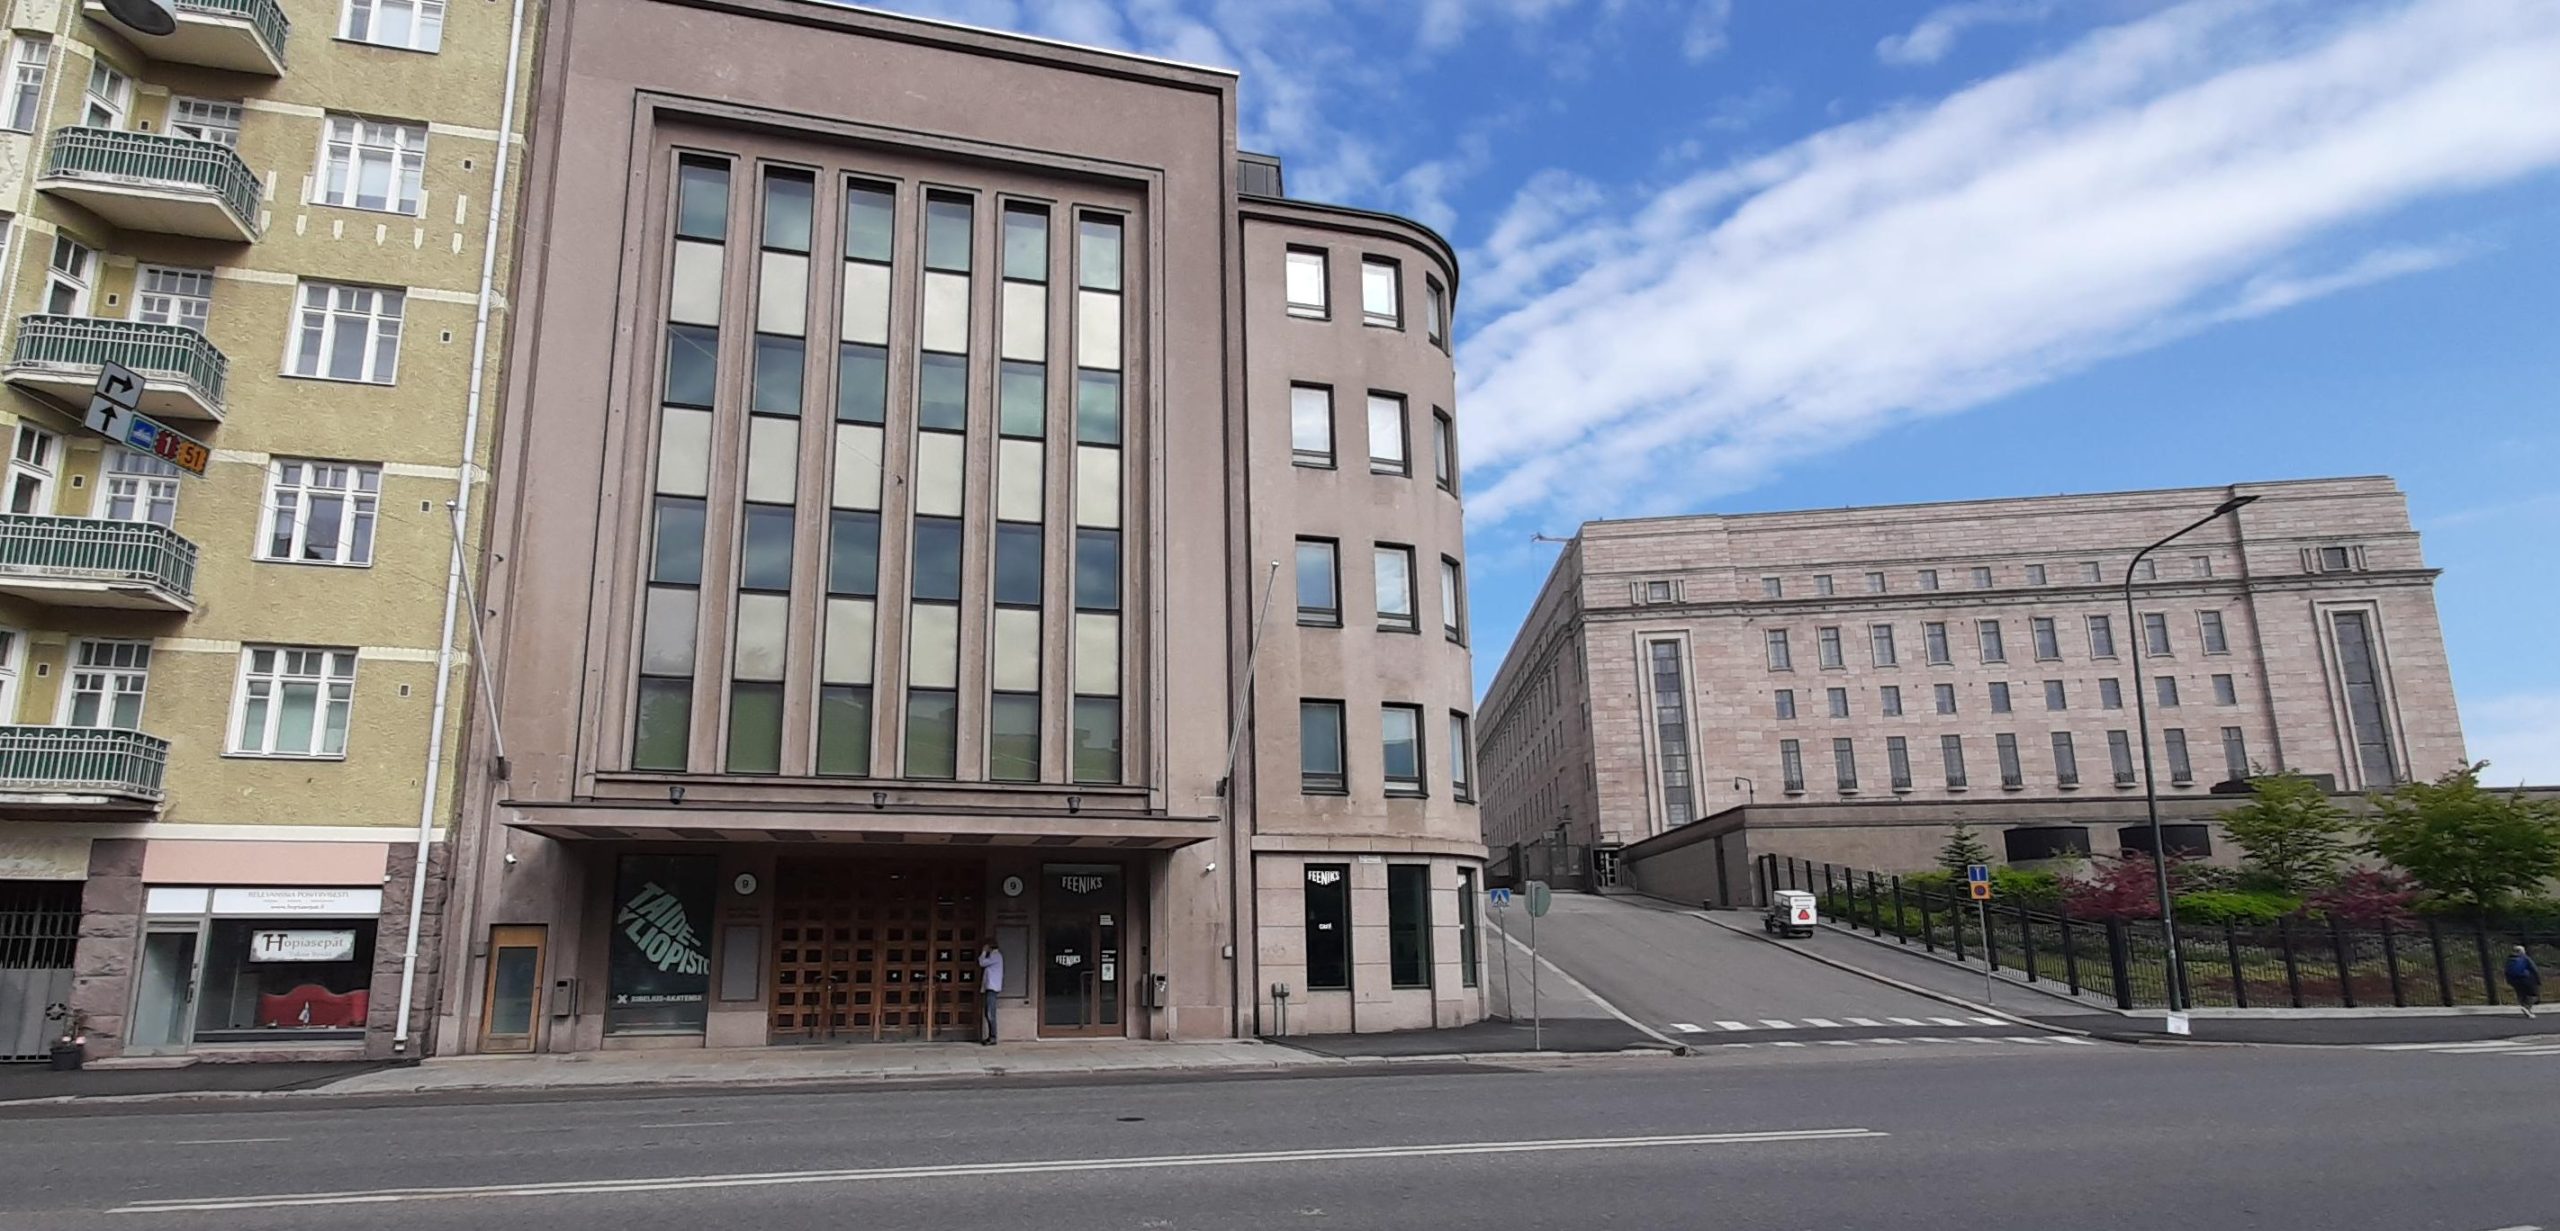 Strategic Communications Hopiasepät is located next to the Parliament of Finland